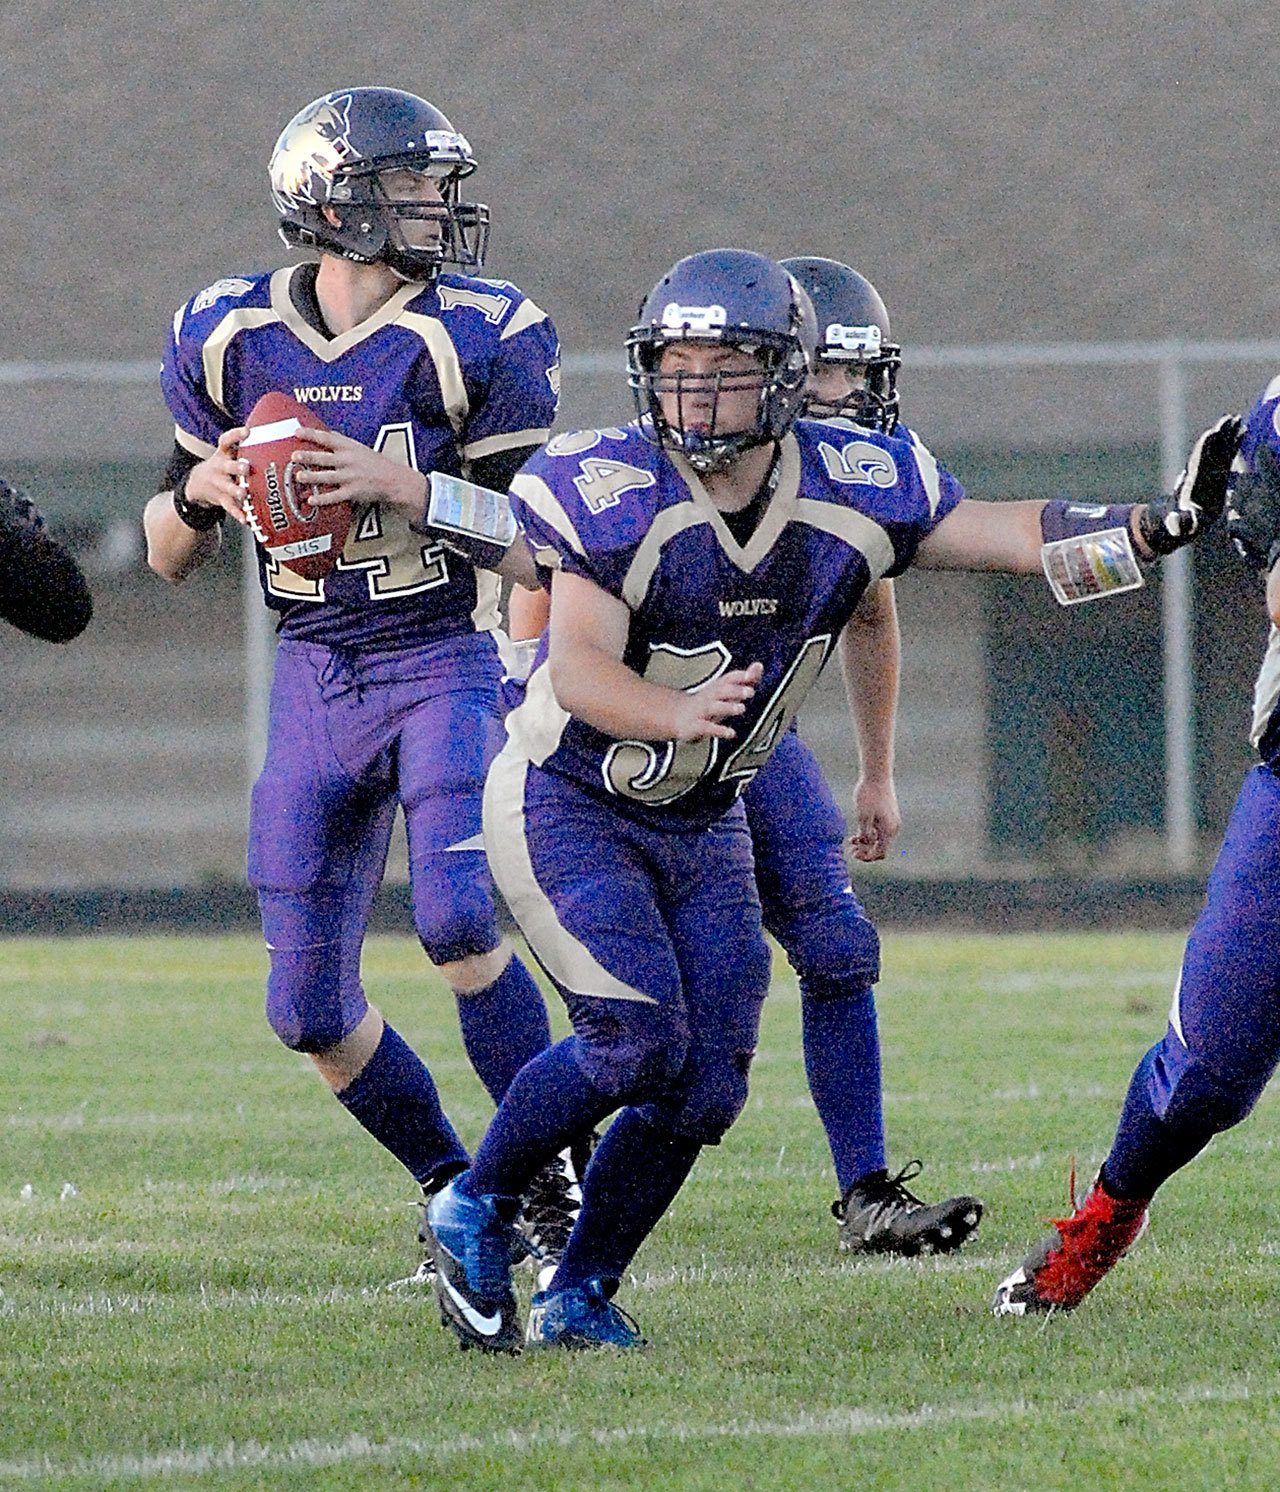 Keith Thorpe/Peninsula Daily News Sequim quarterback Riley Cowen, left, drops back to pass with protection from teammates Adam DiFilippo, center, and Hayden Gresli during the Wolves 66-34 loss to Montesano earlier this month.